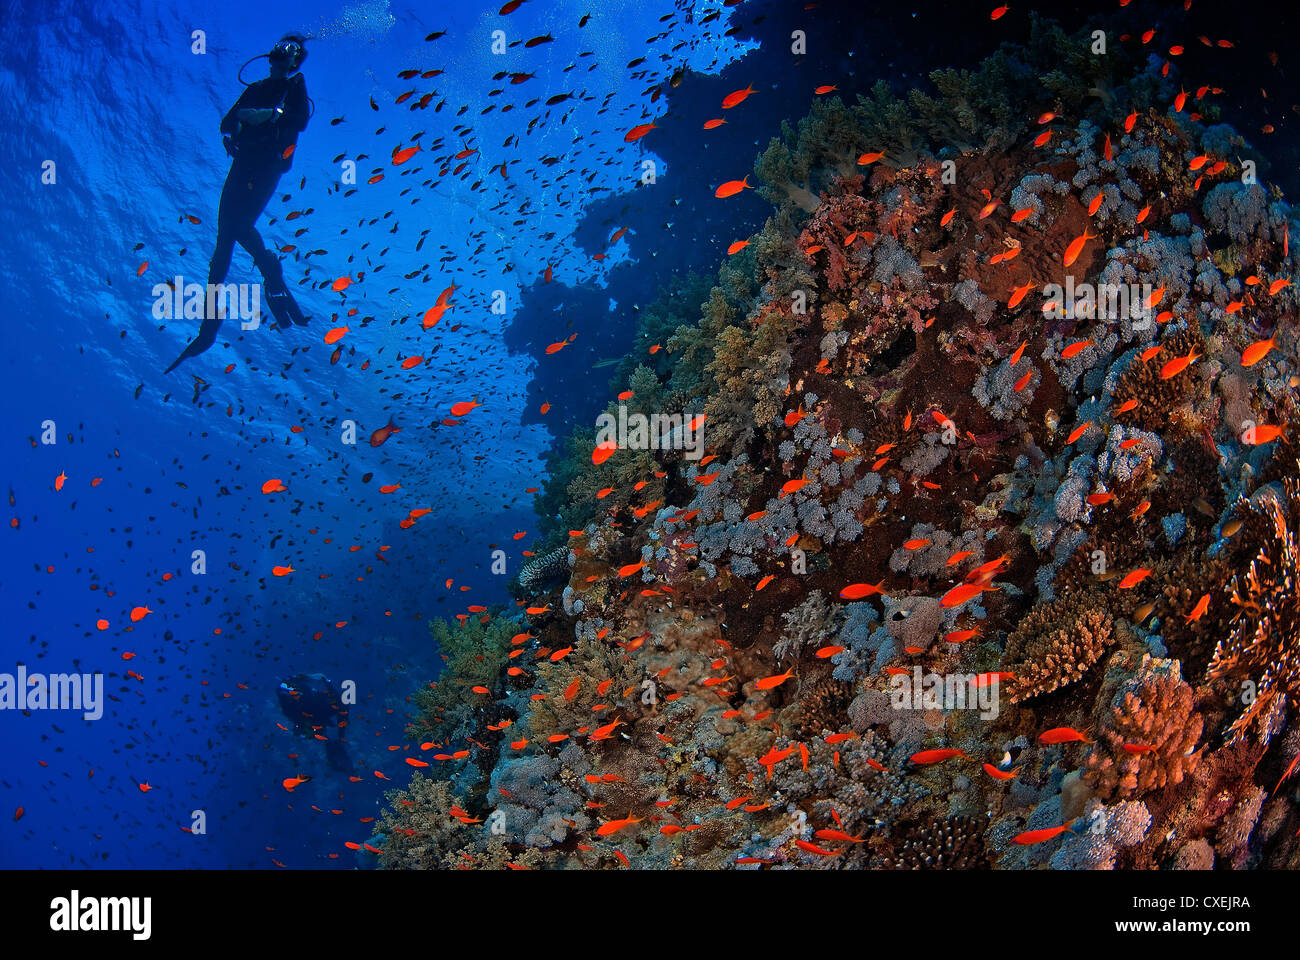 Reef scene with orange fish scuttling around and diver floating nearby Stock Photo